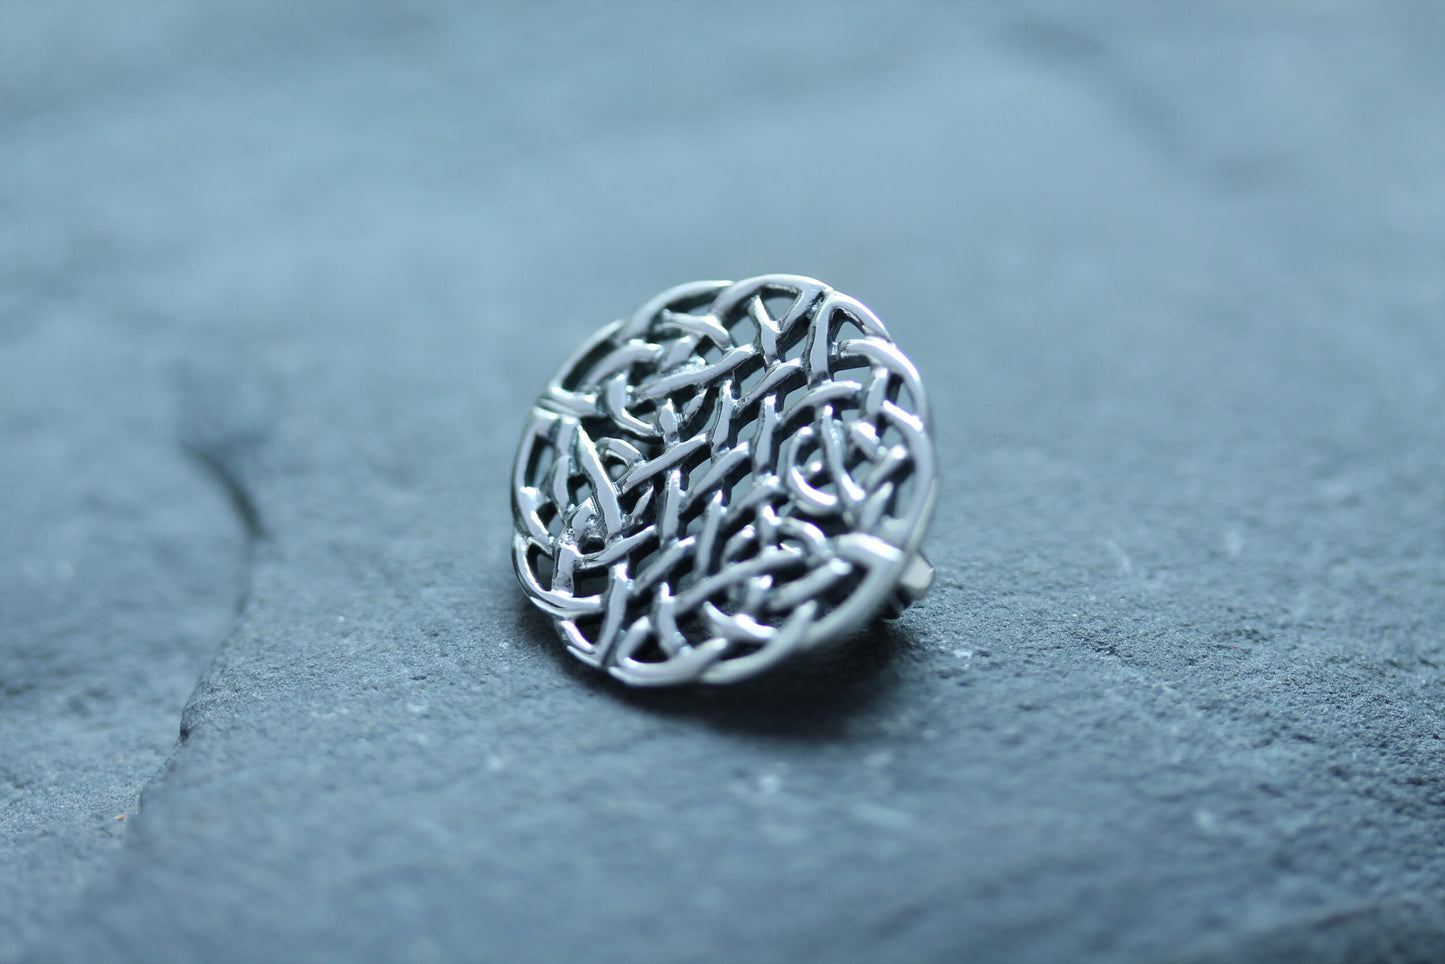 Celtic Knot Brooch - Densely Knotted Shield